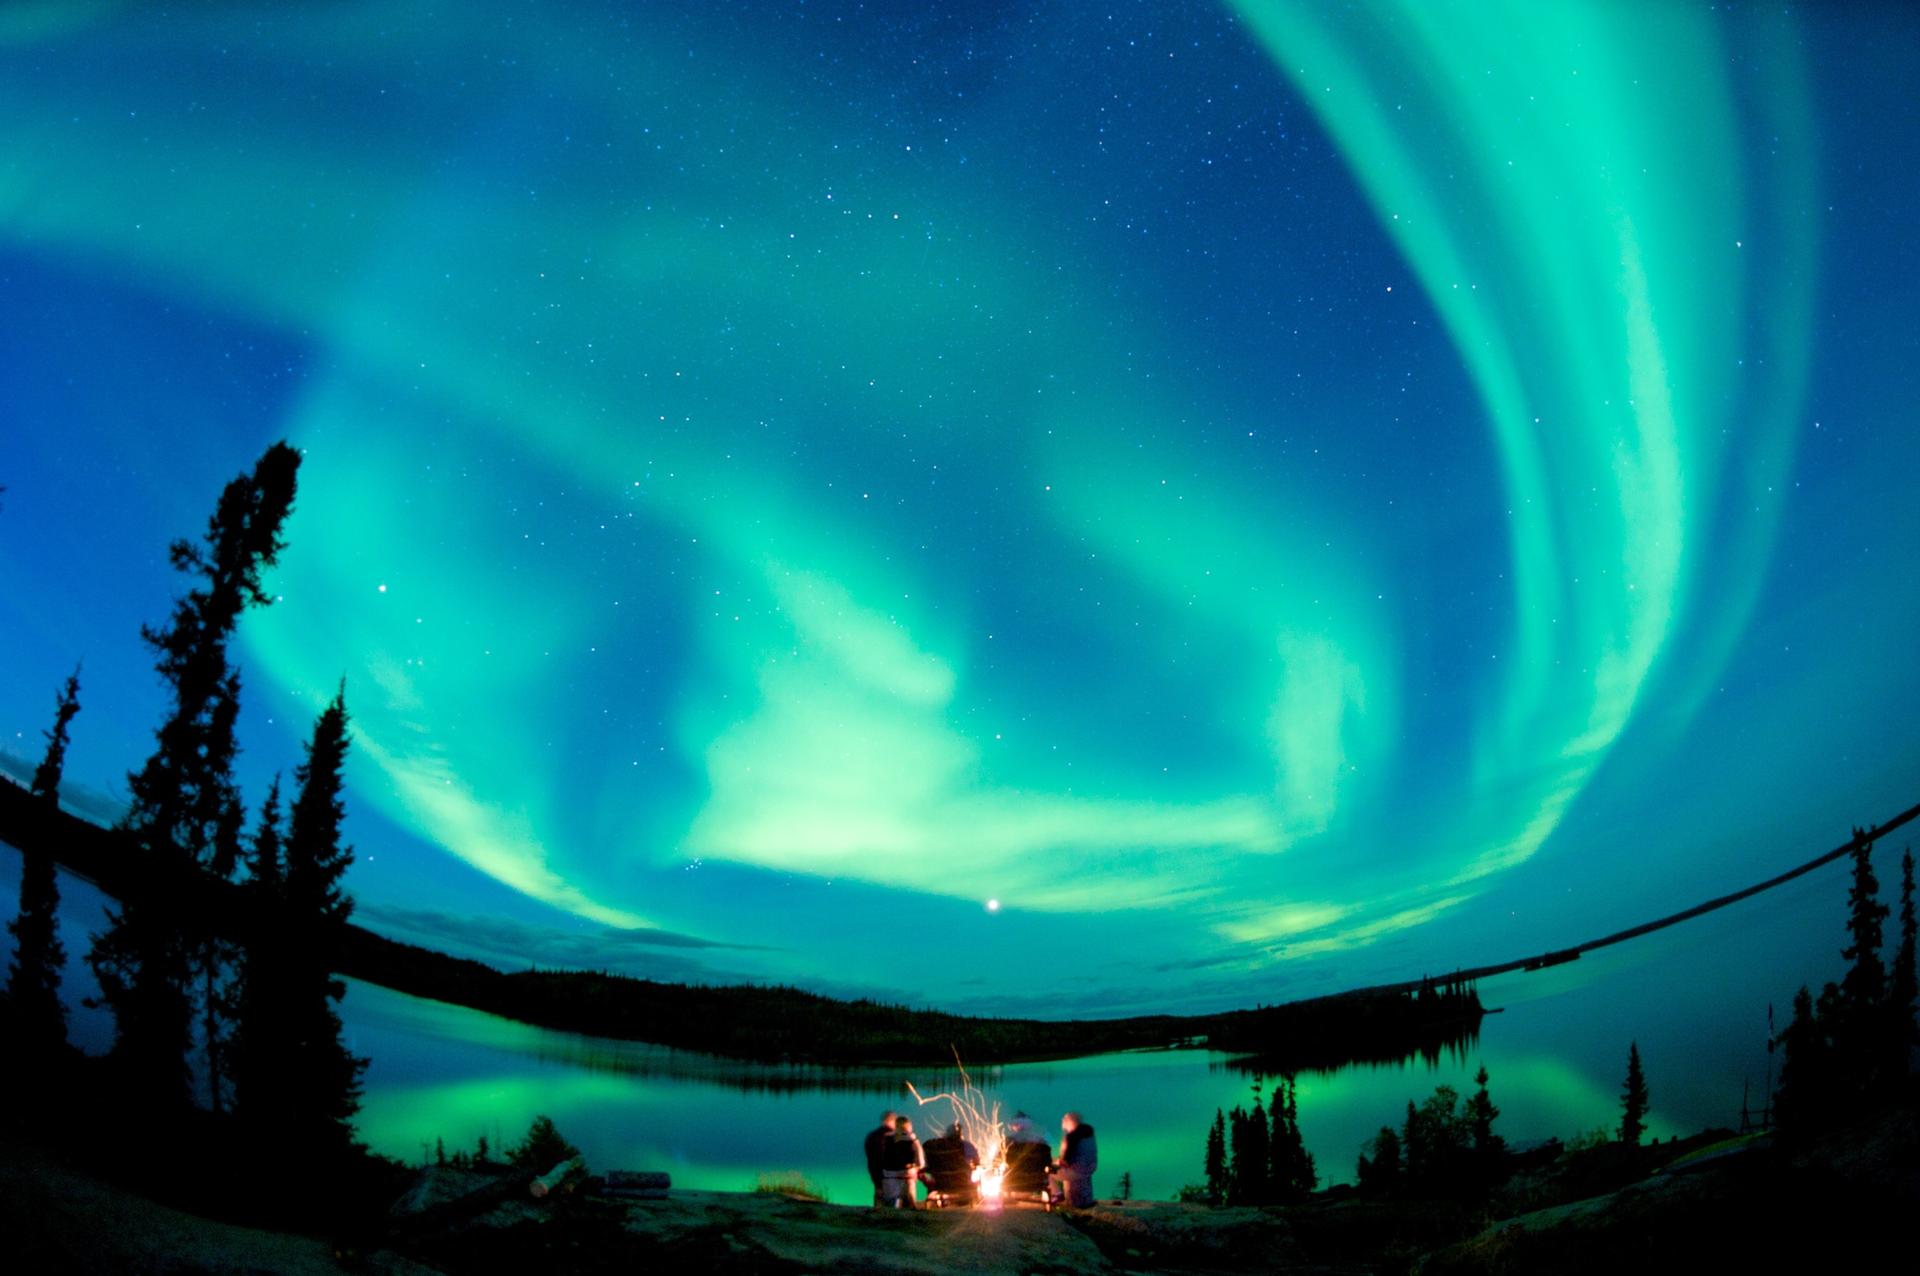 Aurora viewing at Blachford Lake Lodge in the Northwest Territories